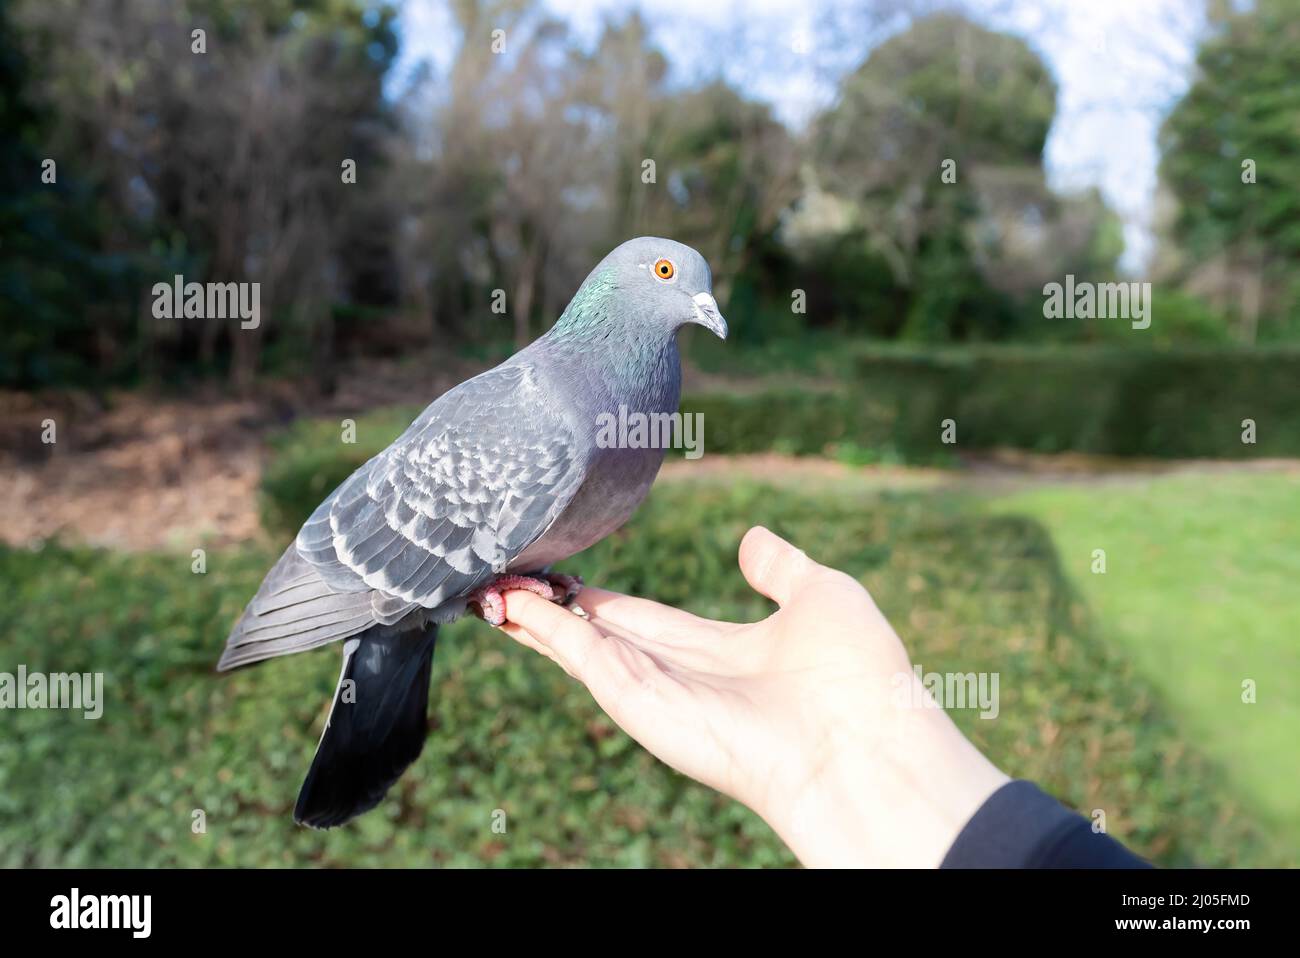 Close up of a Feral pigeon feeding from a hand in a park, UK. Stock Photo